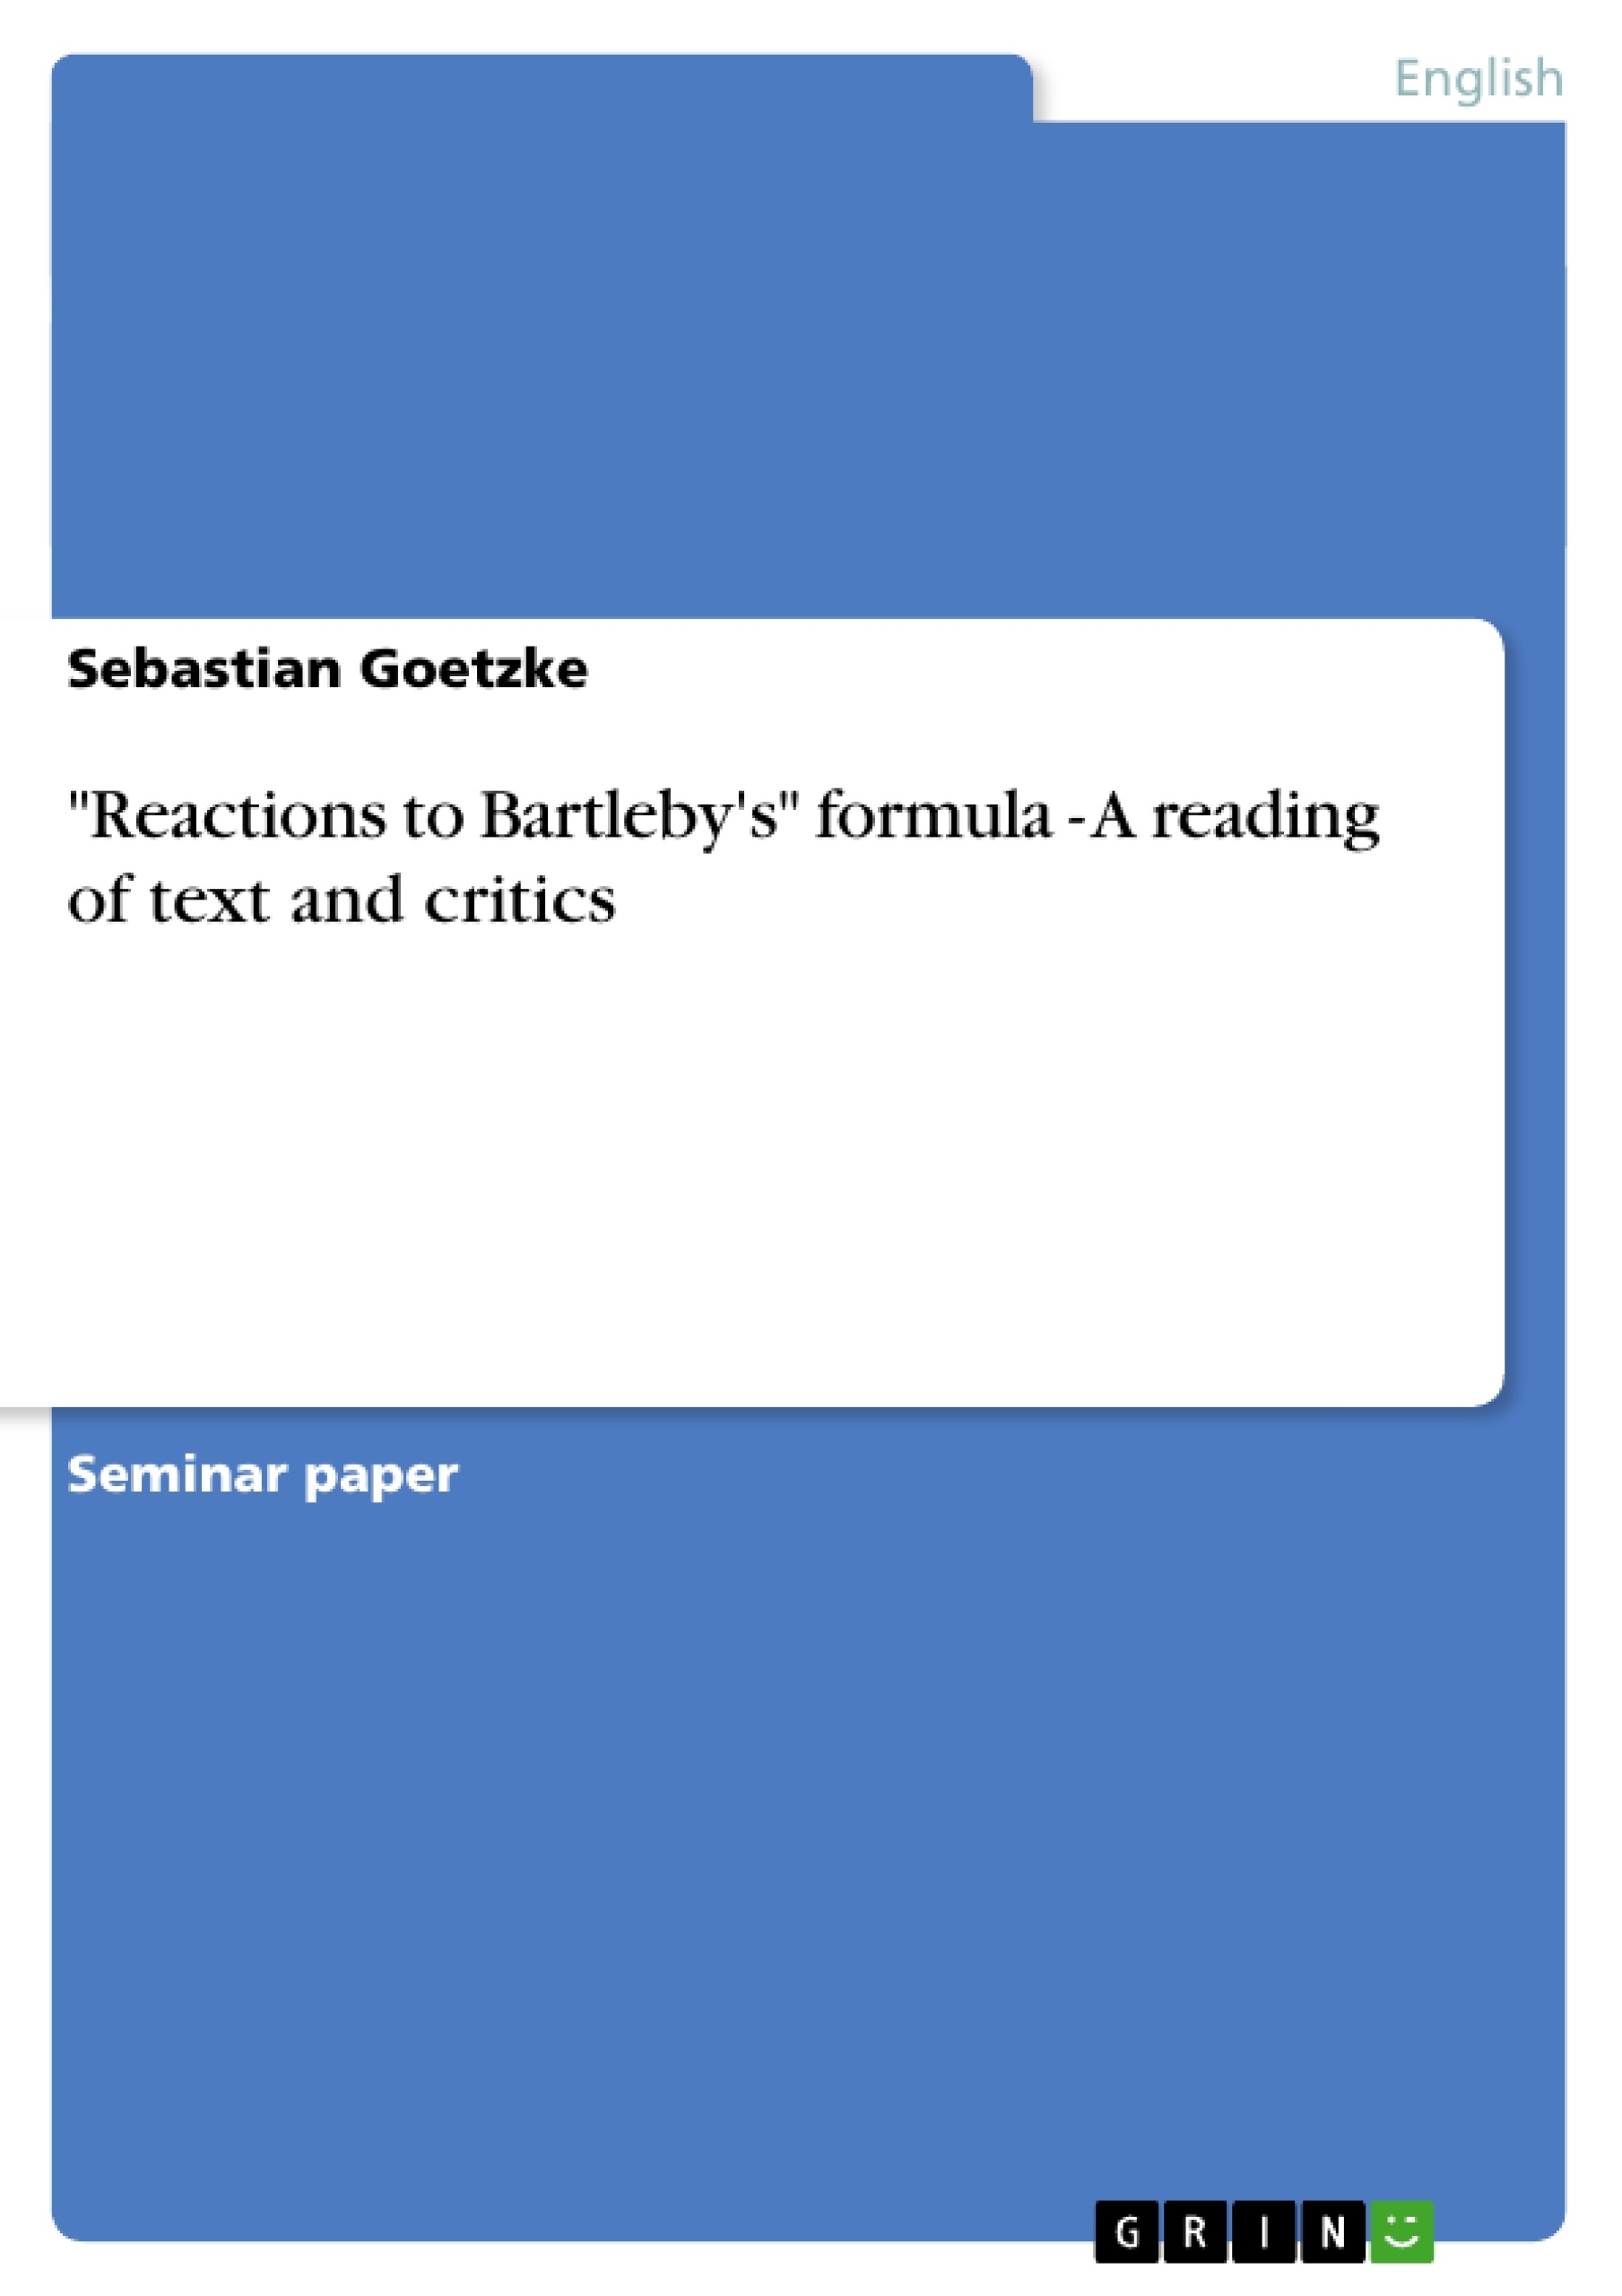 Titre: "Reactions to Bartleby's" formula - A reading of text and critics